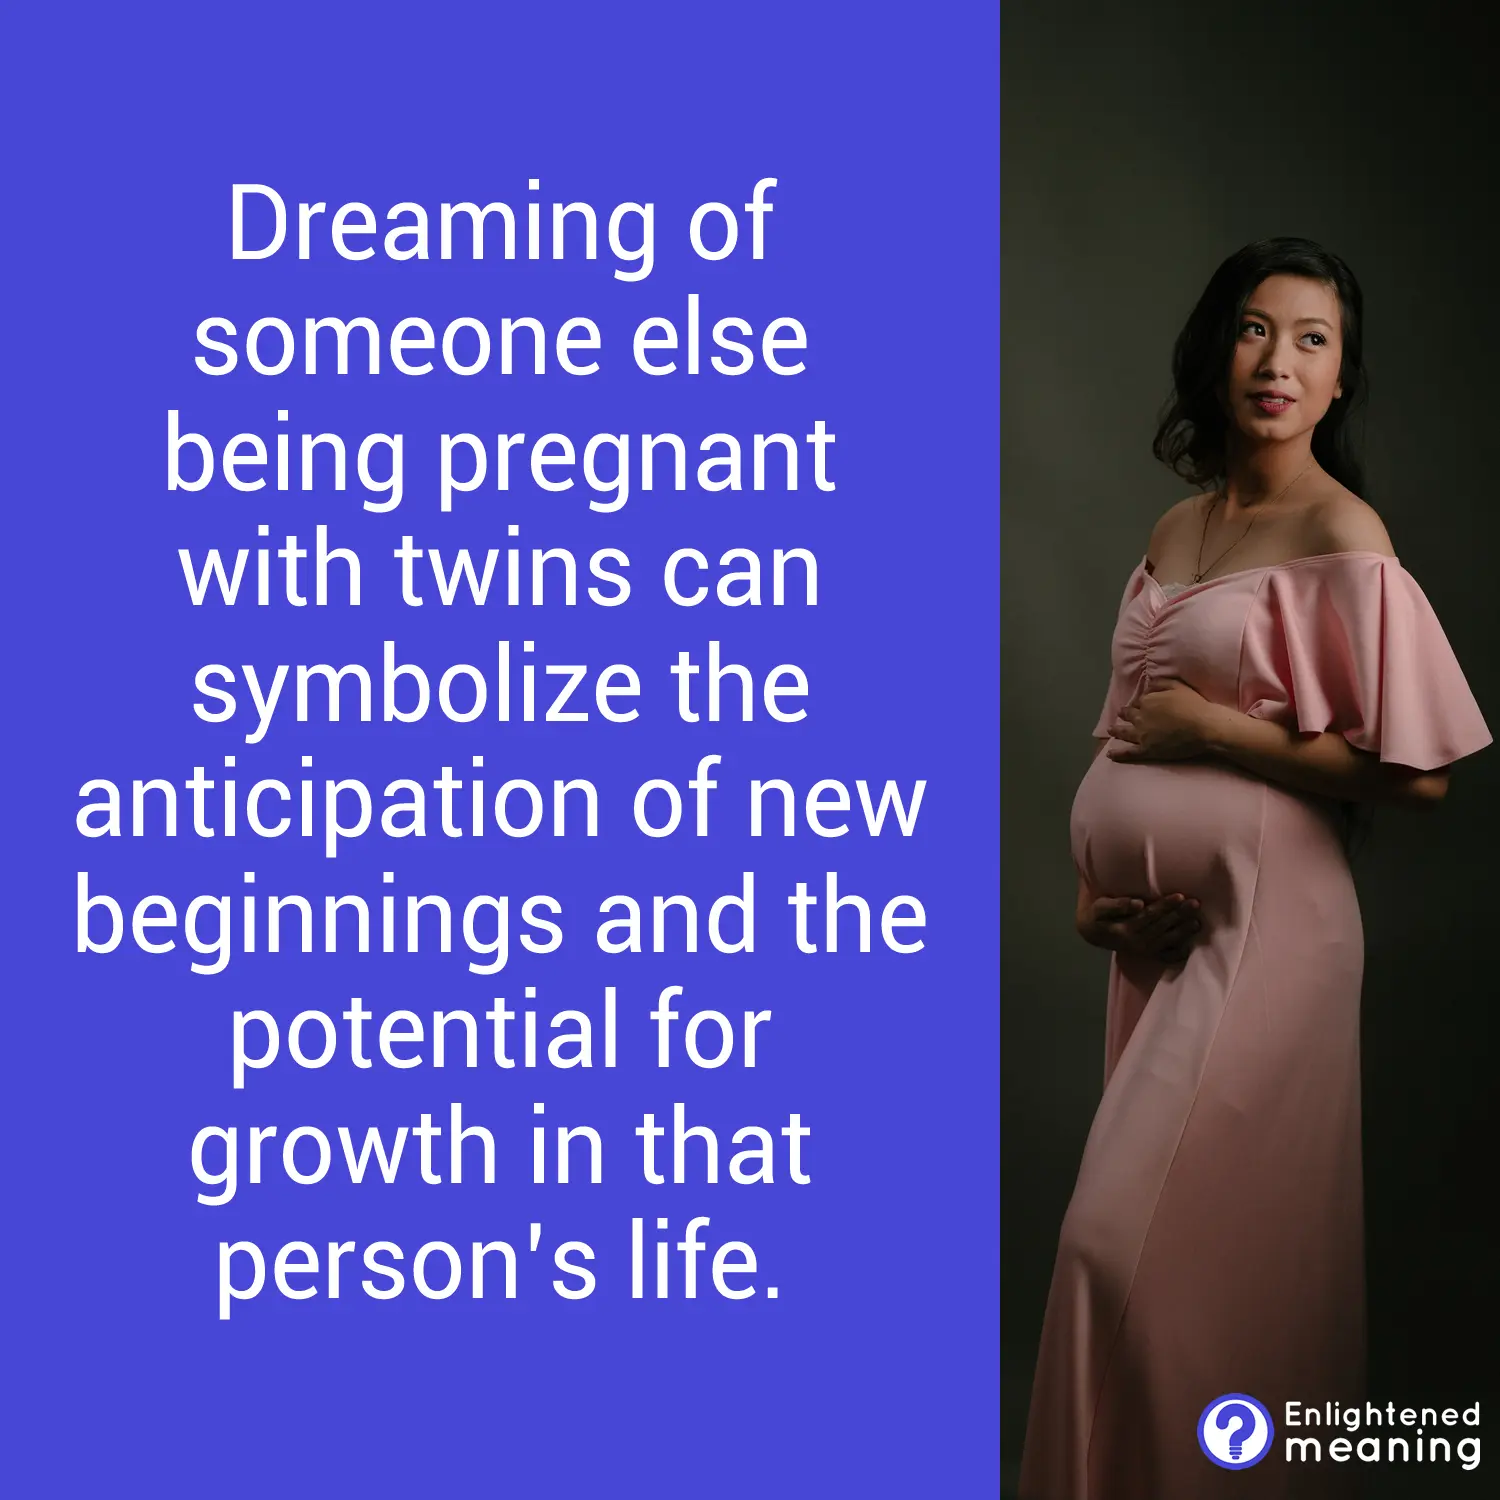 Dreaming of someone else being pregnant with twins